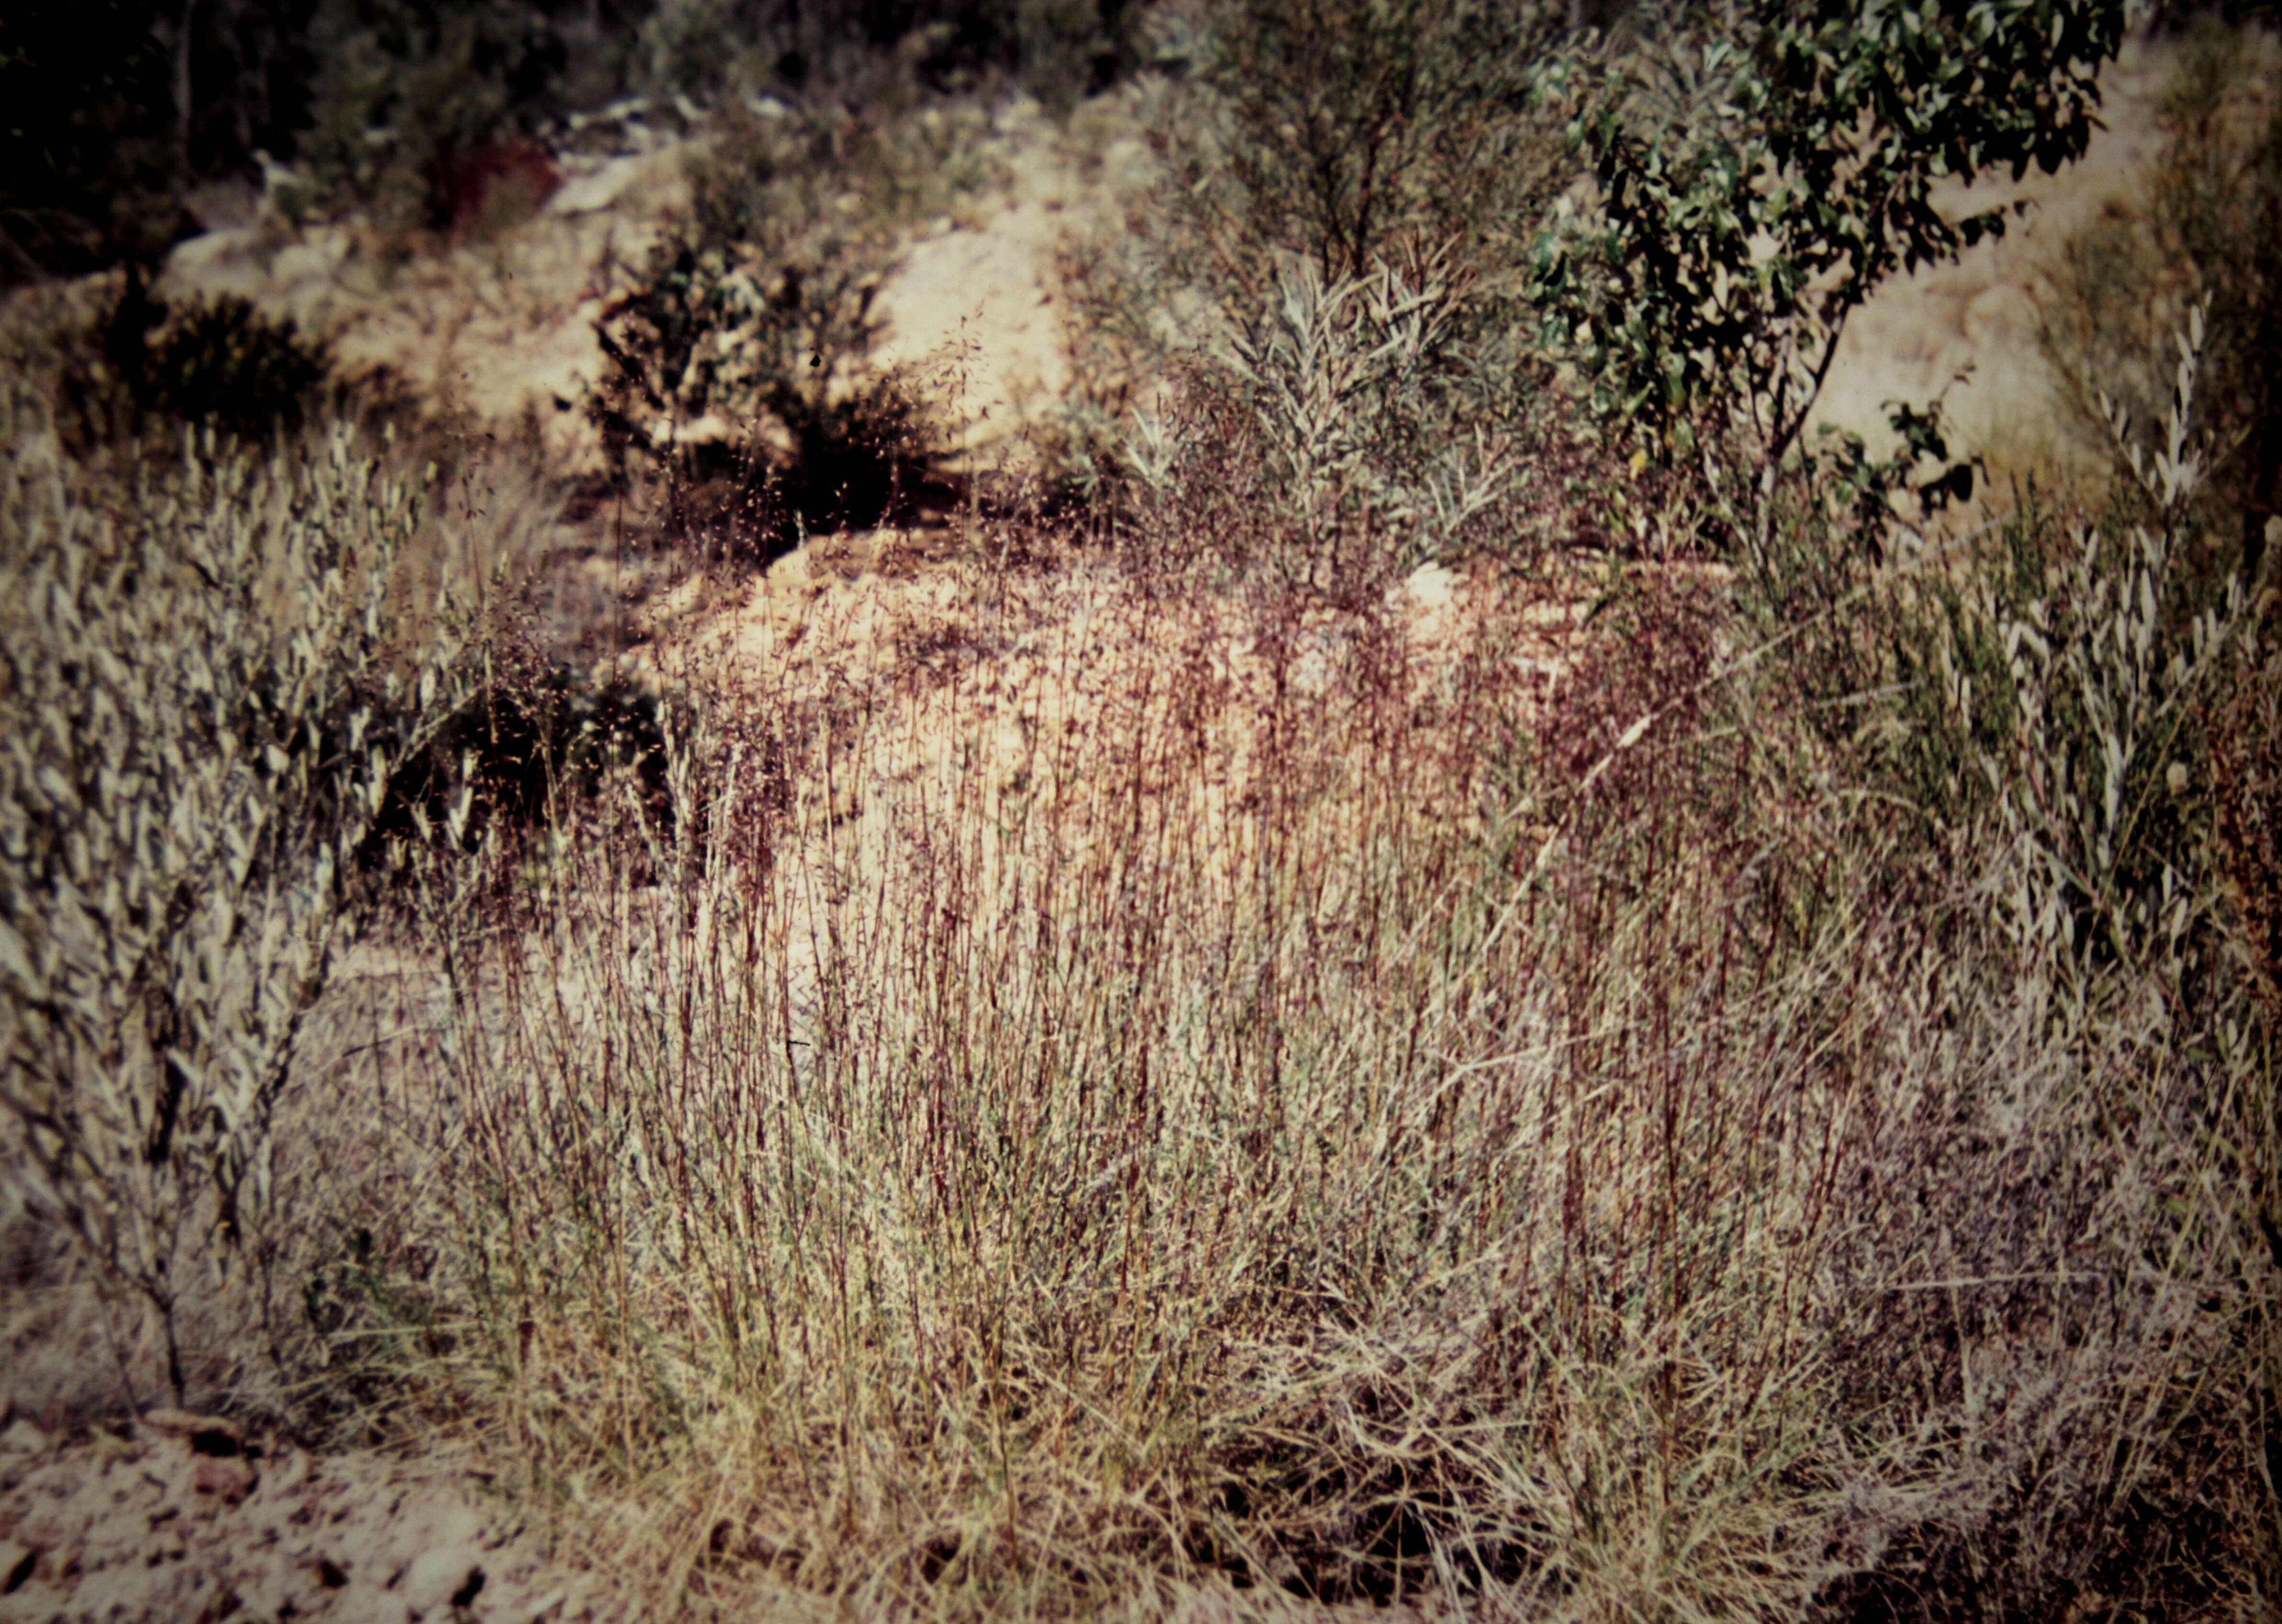 Image of Australian Spinifex